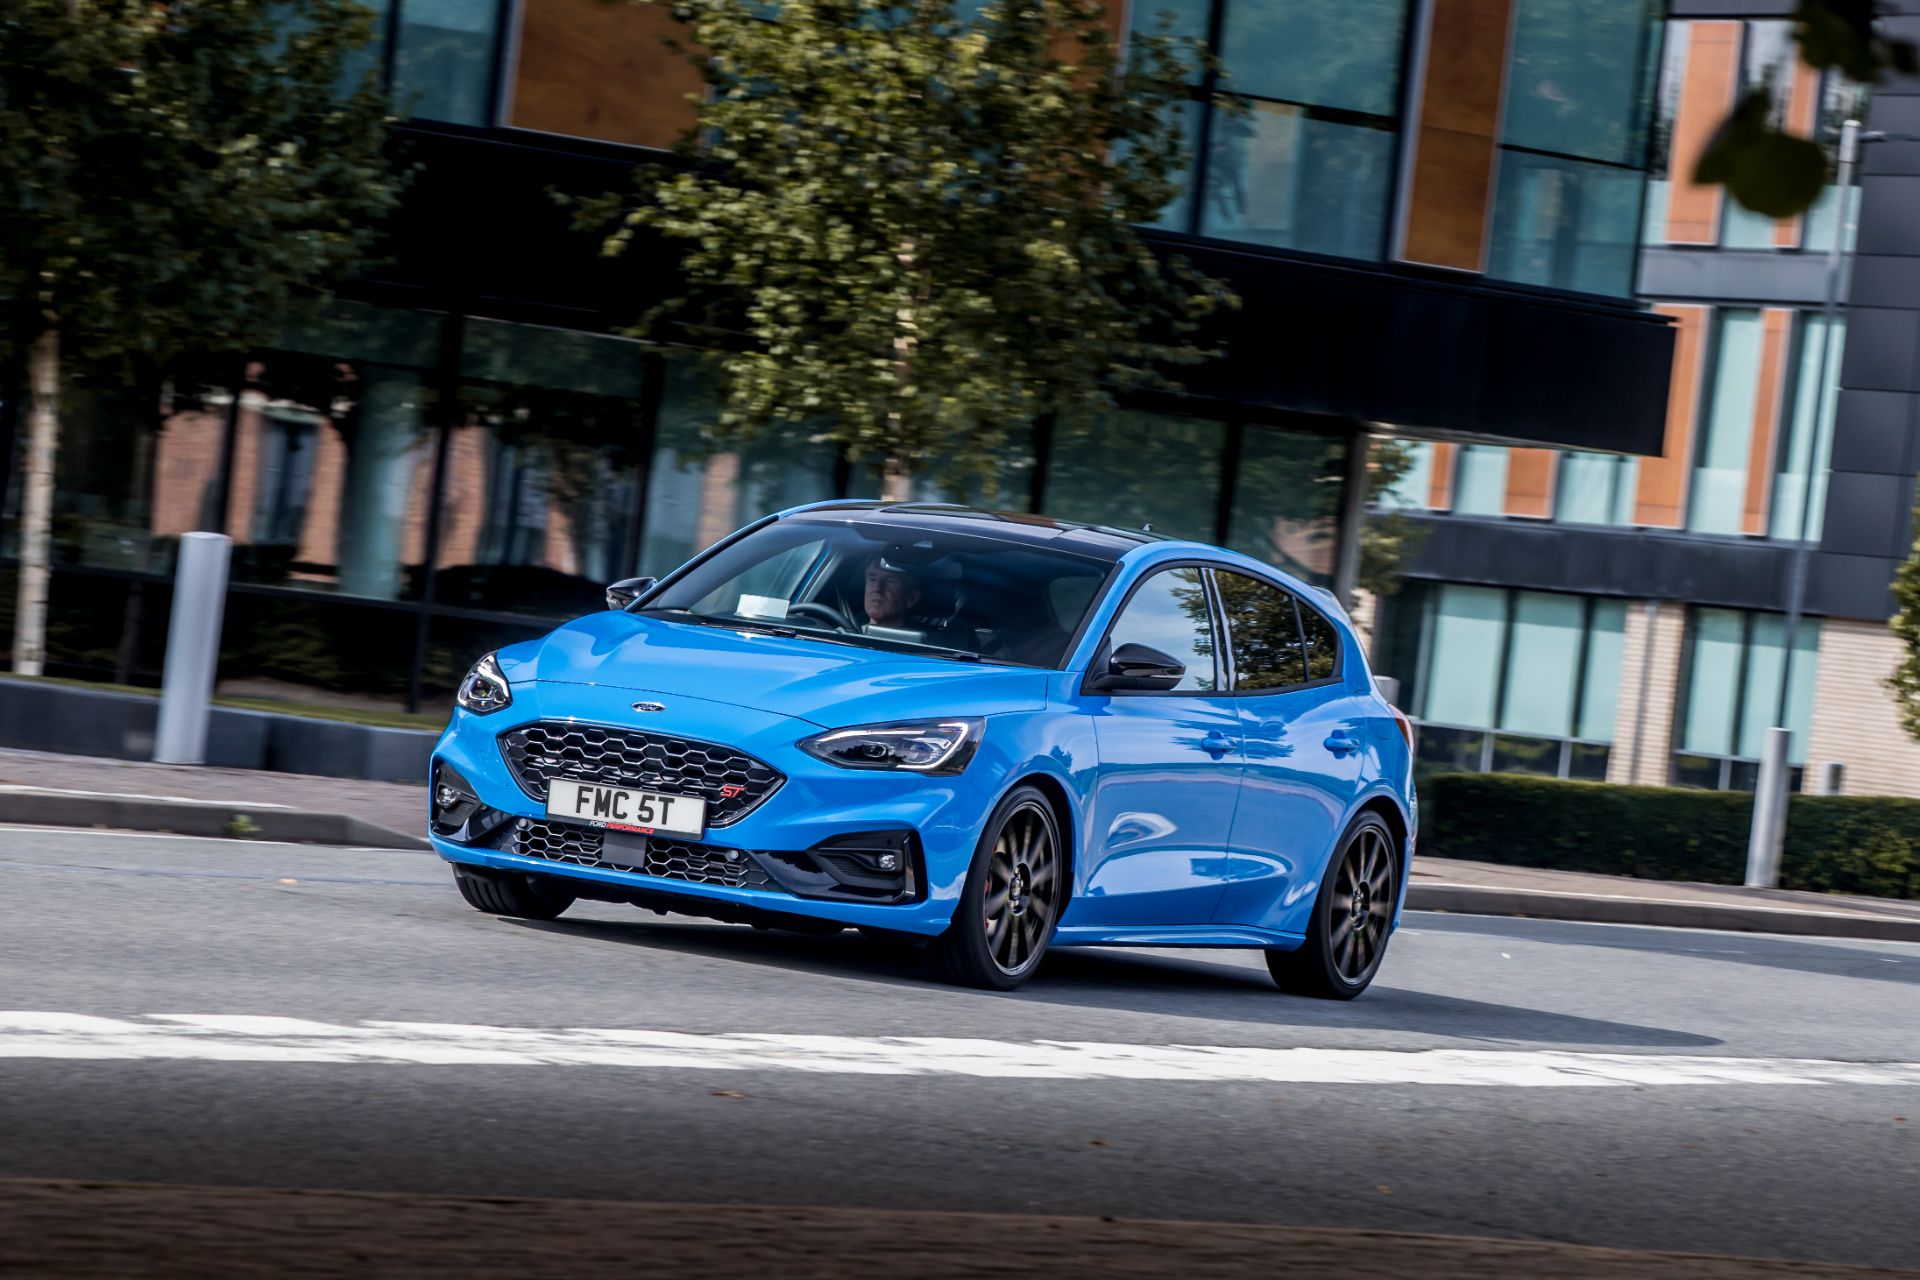 2019 Ford Focus ST Mk4 debuts  276 hp and 430 Nm 23 litre turbo 6sp  manual or 7sp auto transmissions  paultanorg